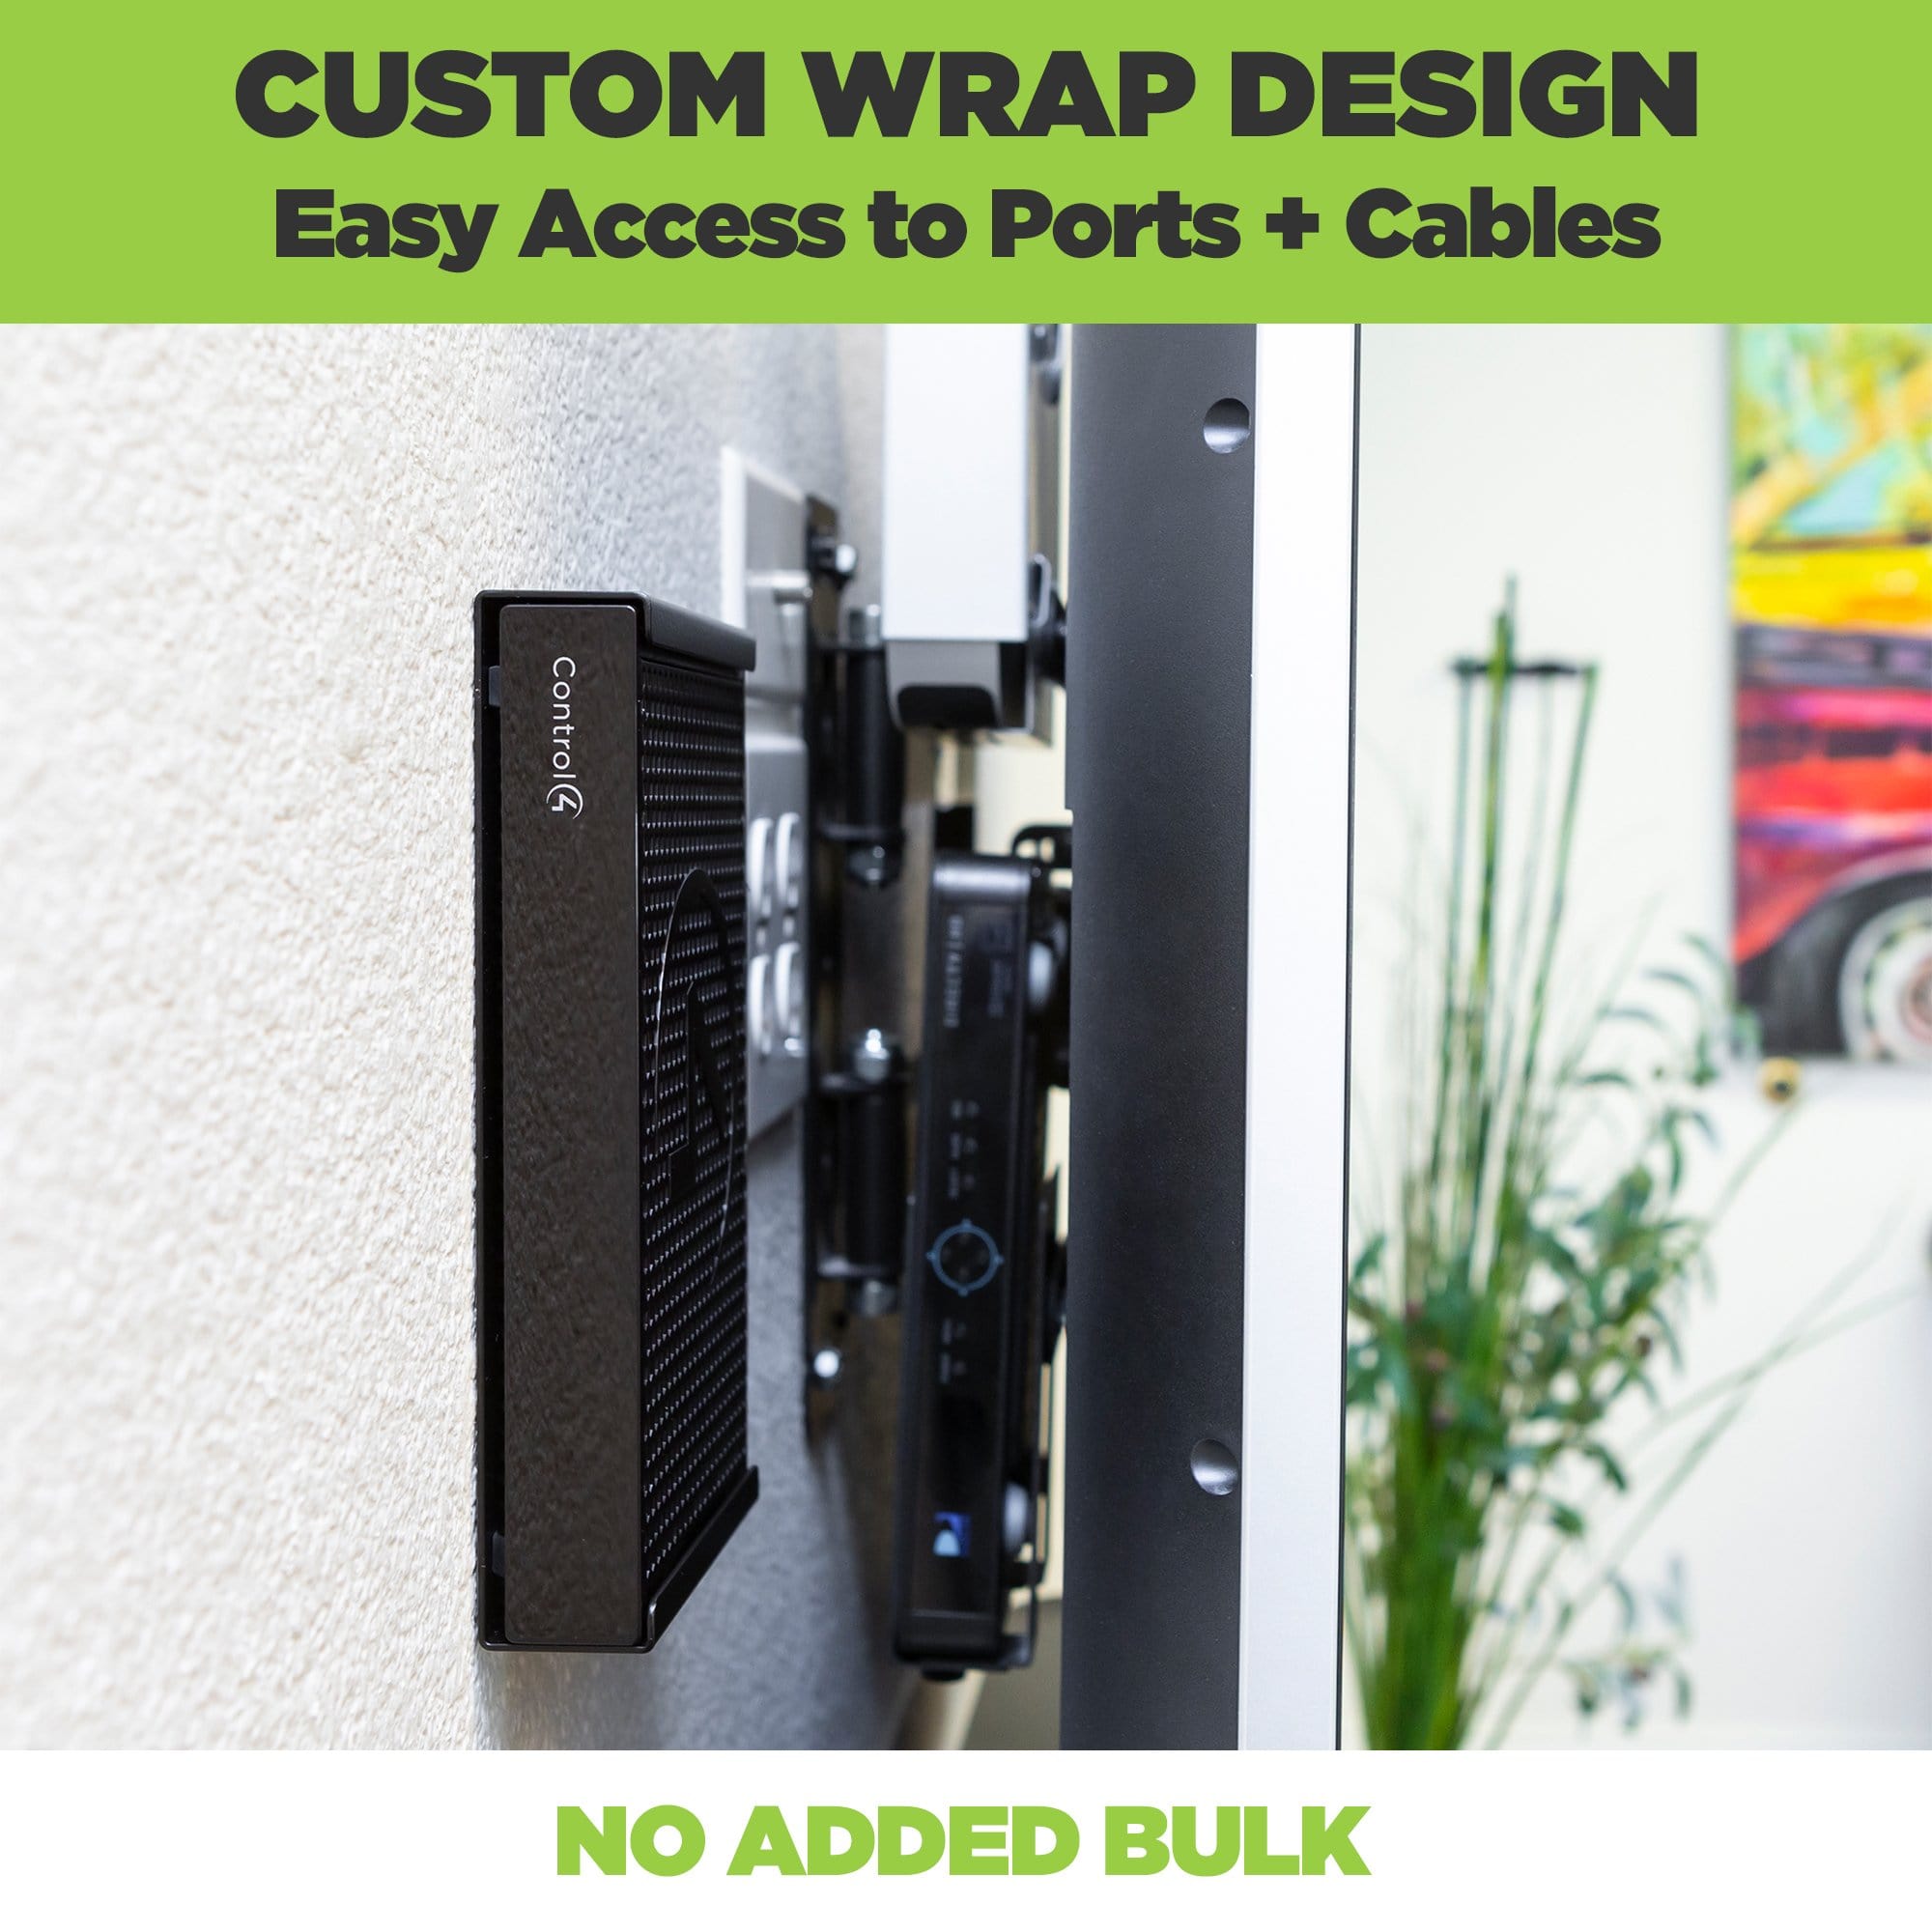 Control4 EA-1 controller wall mounted behind the TV to save space. Custom wrap design won't block ports or cables.